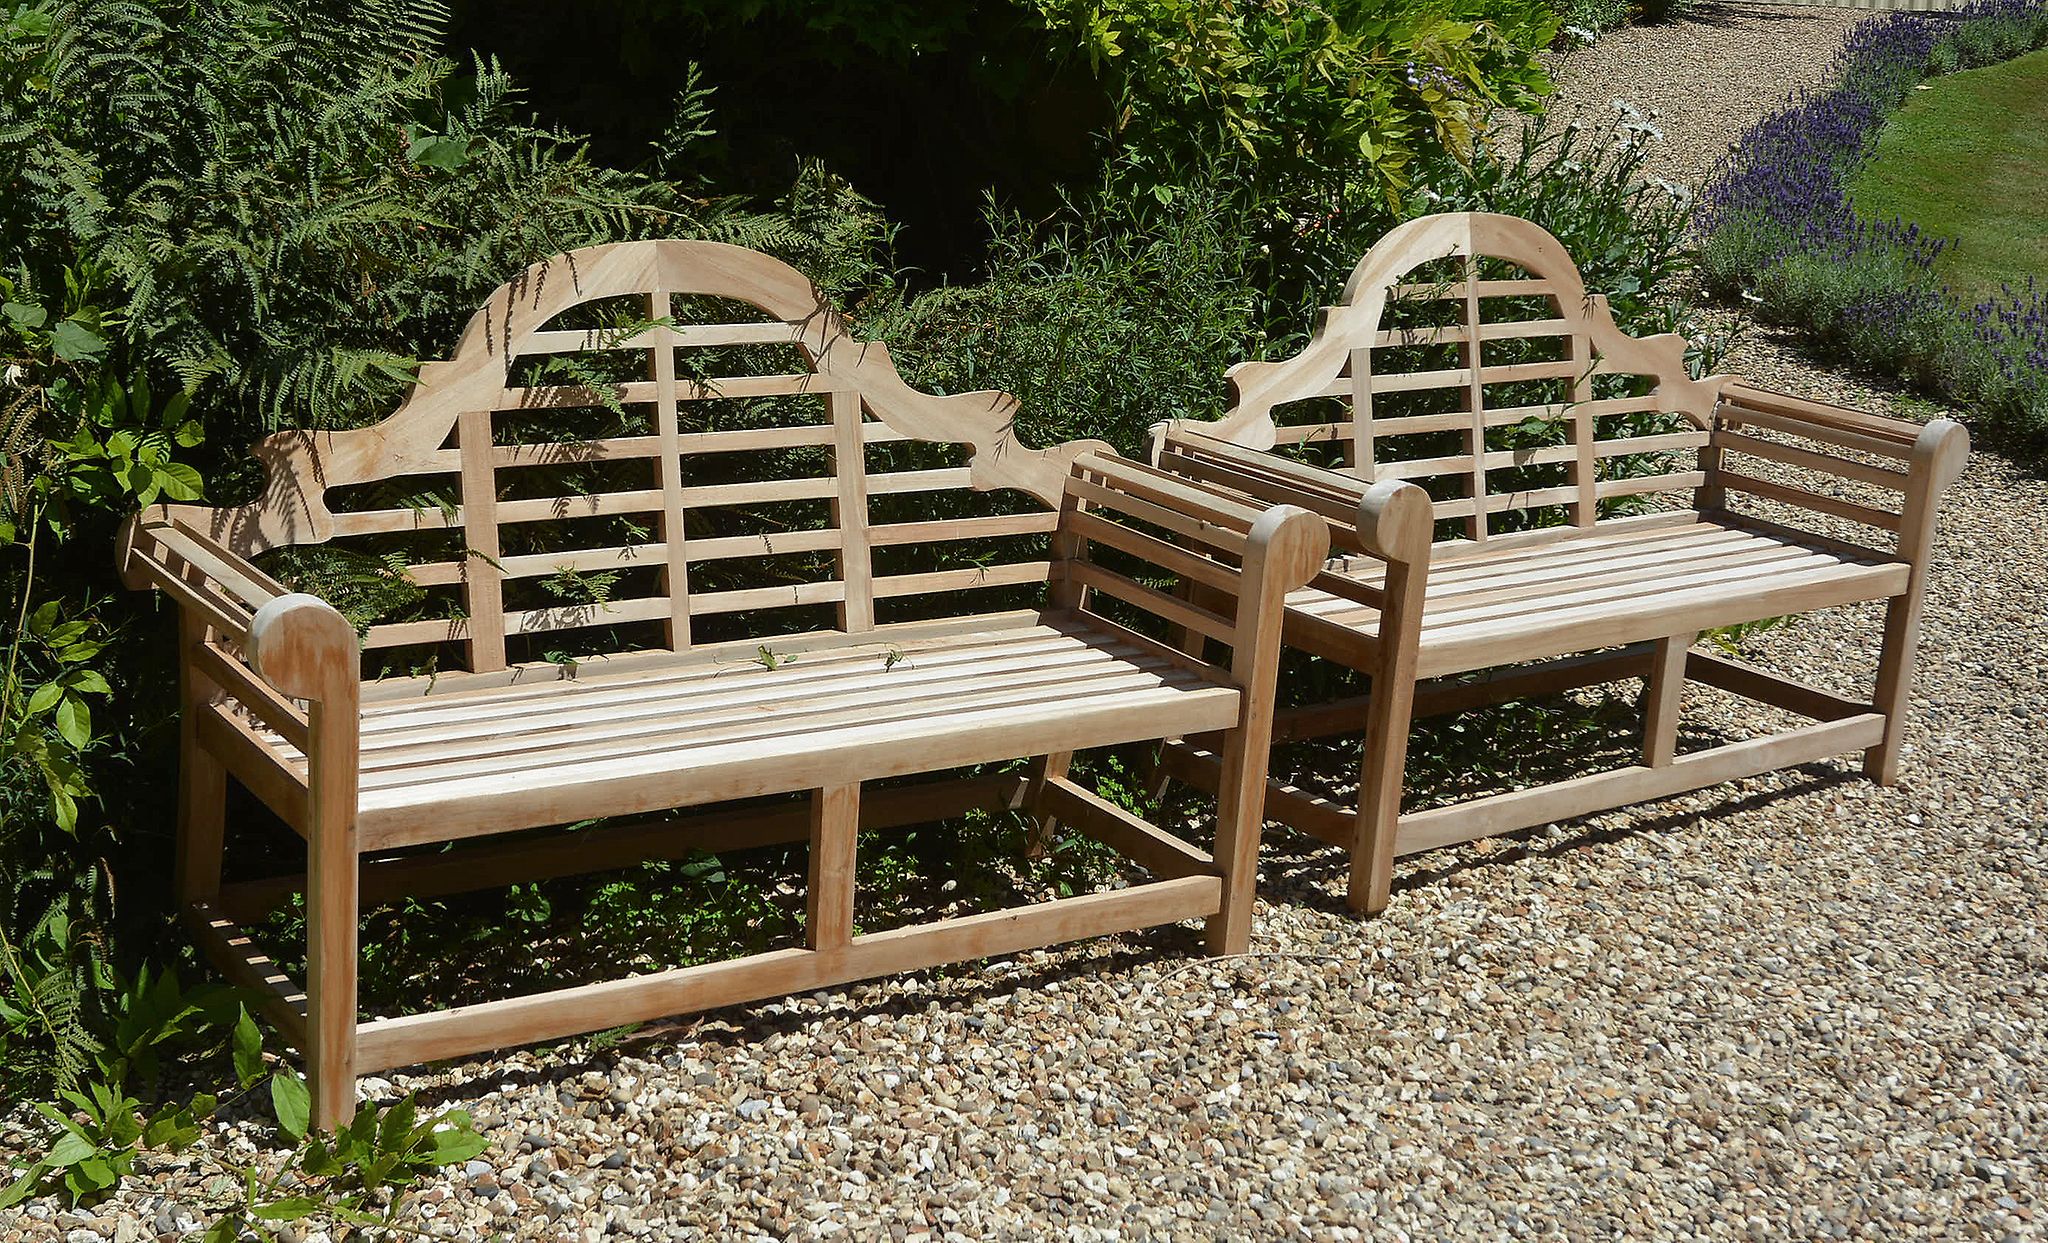 A pair of teak garden seats in the manner of designs by Lutyens A pair of teak garden seats in the